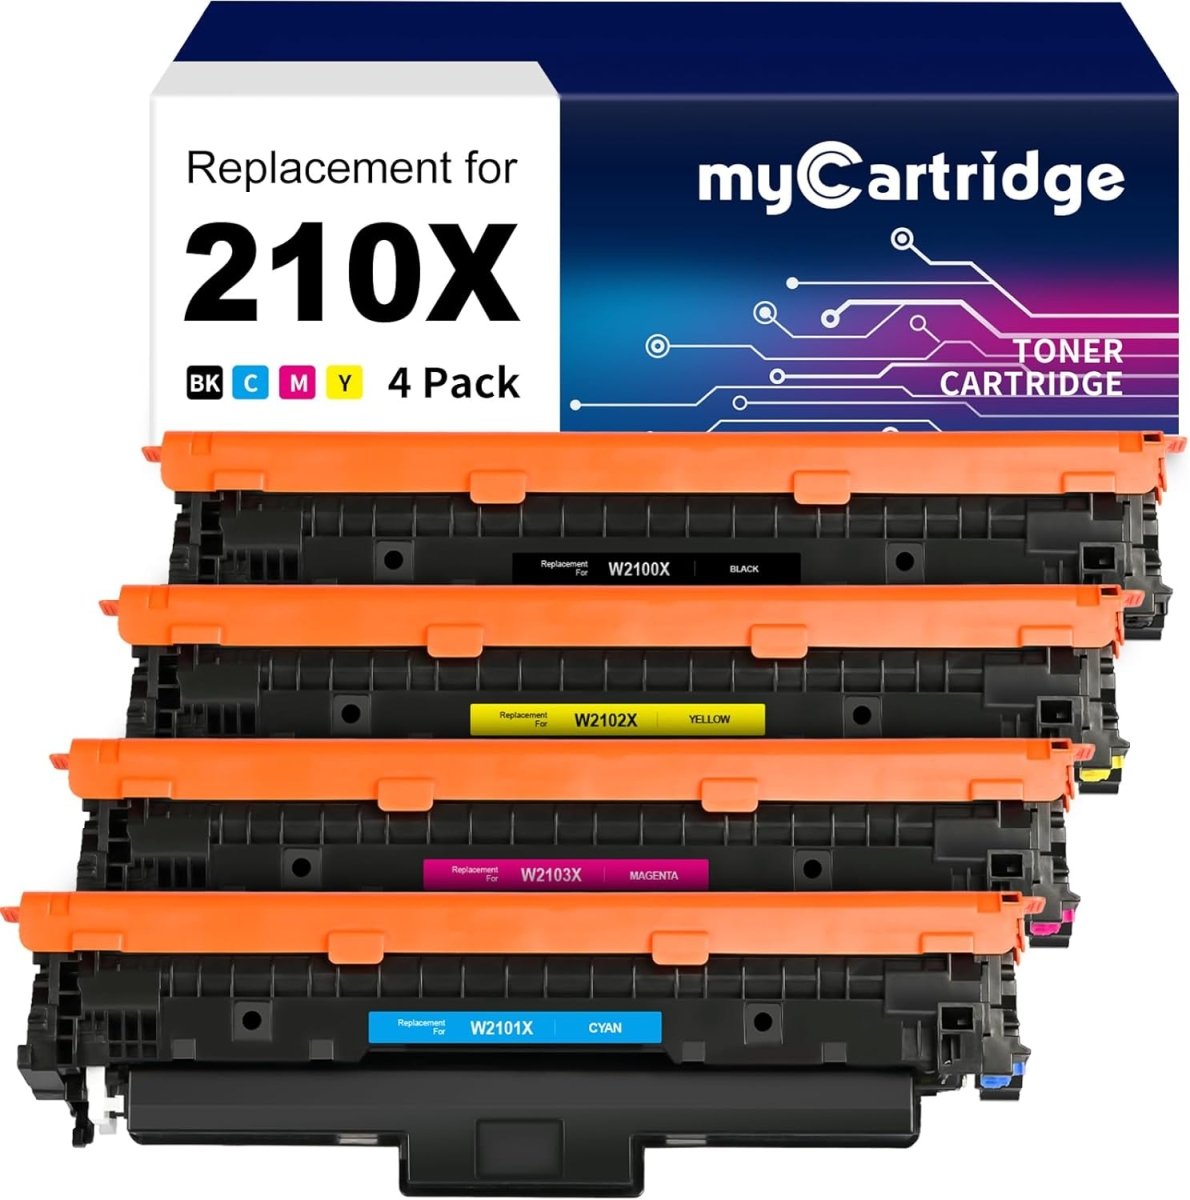 Compatible HP 210X Toner Cartridges with Chip, High Capacity, 4-Pack - Linford Office:Printer Ink & Toner Cartridge